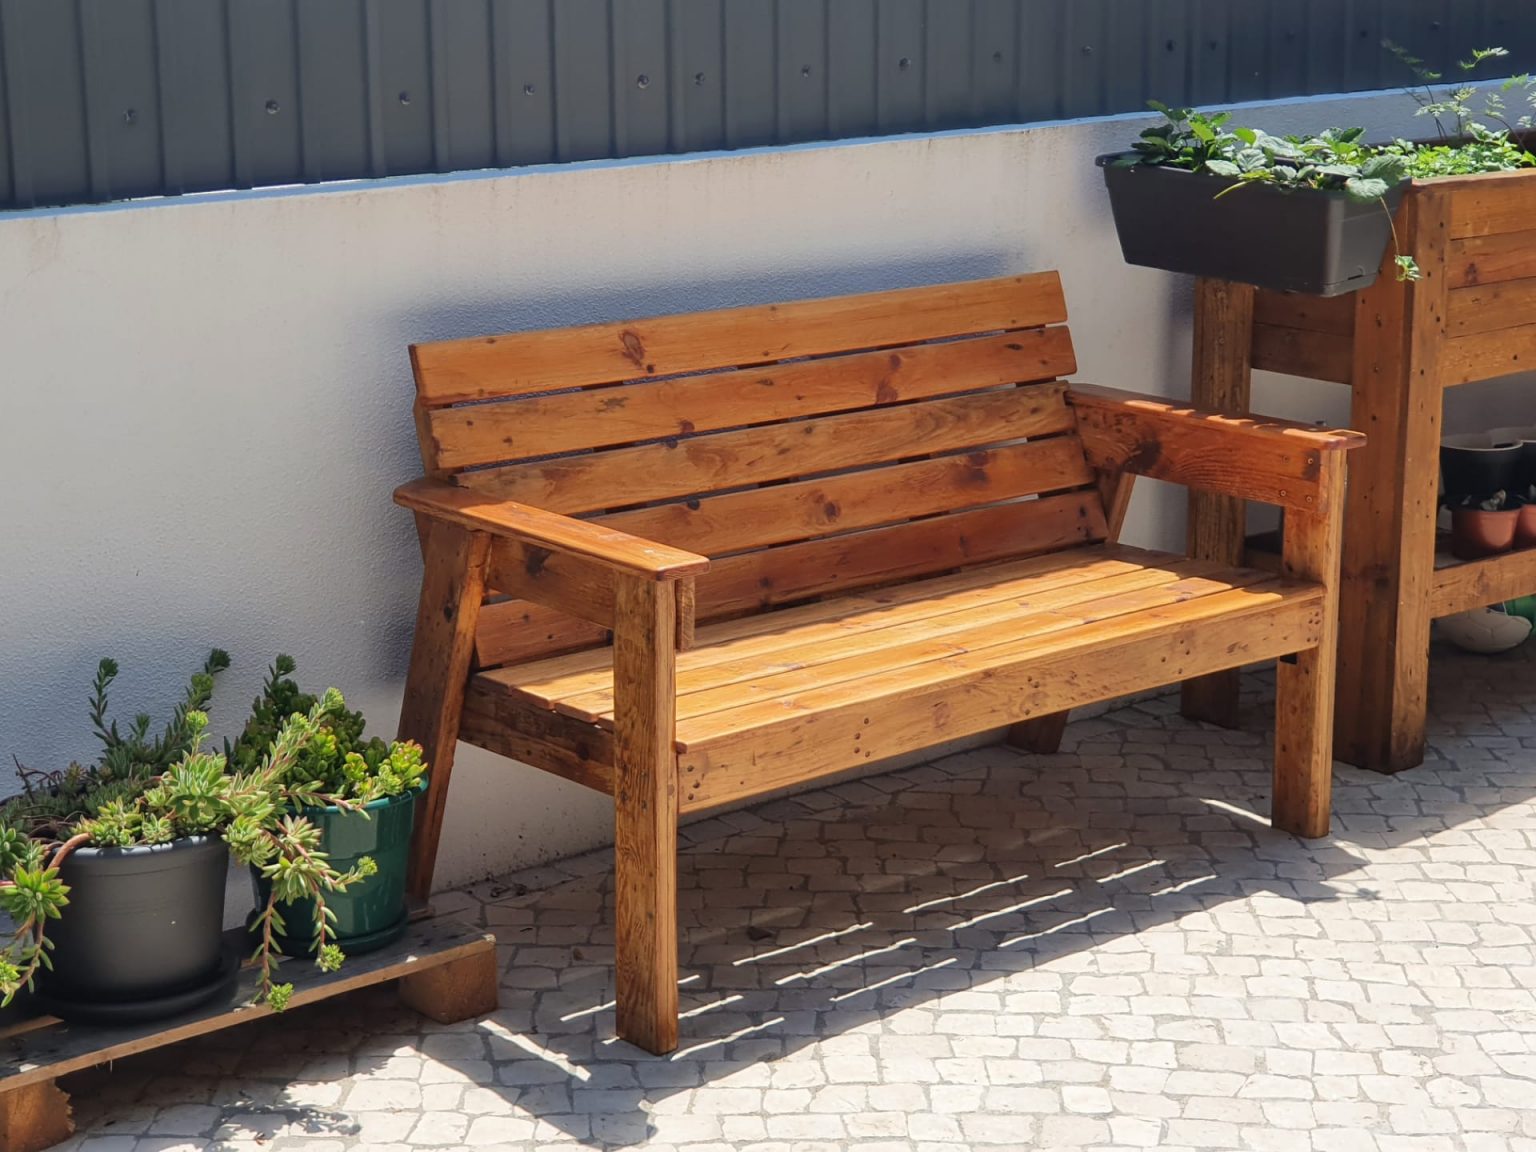 2x4 Garden Bench | HowToSpecialist - How to Build, Step by Step DIY Plans